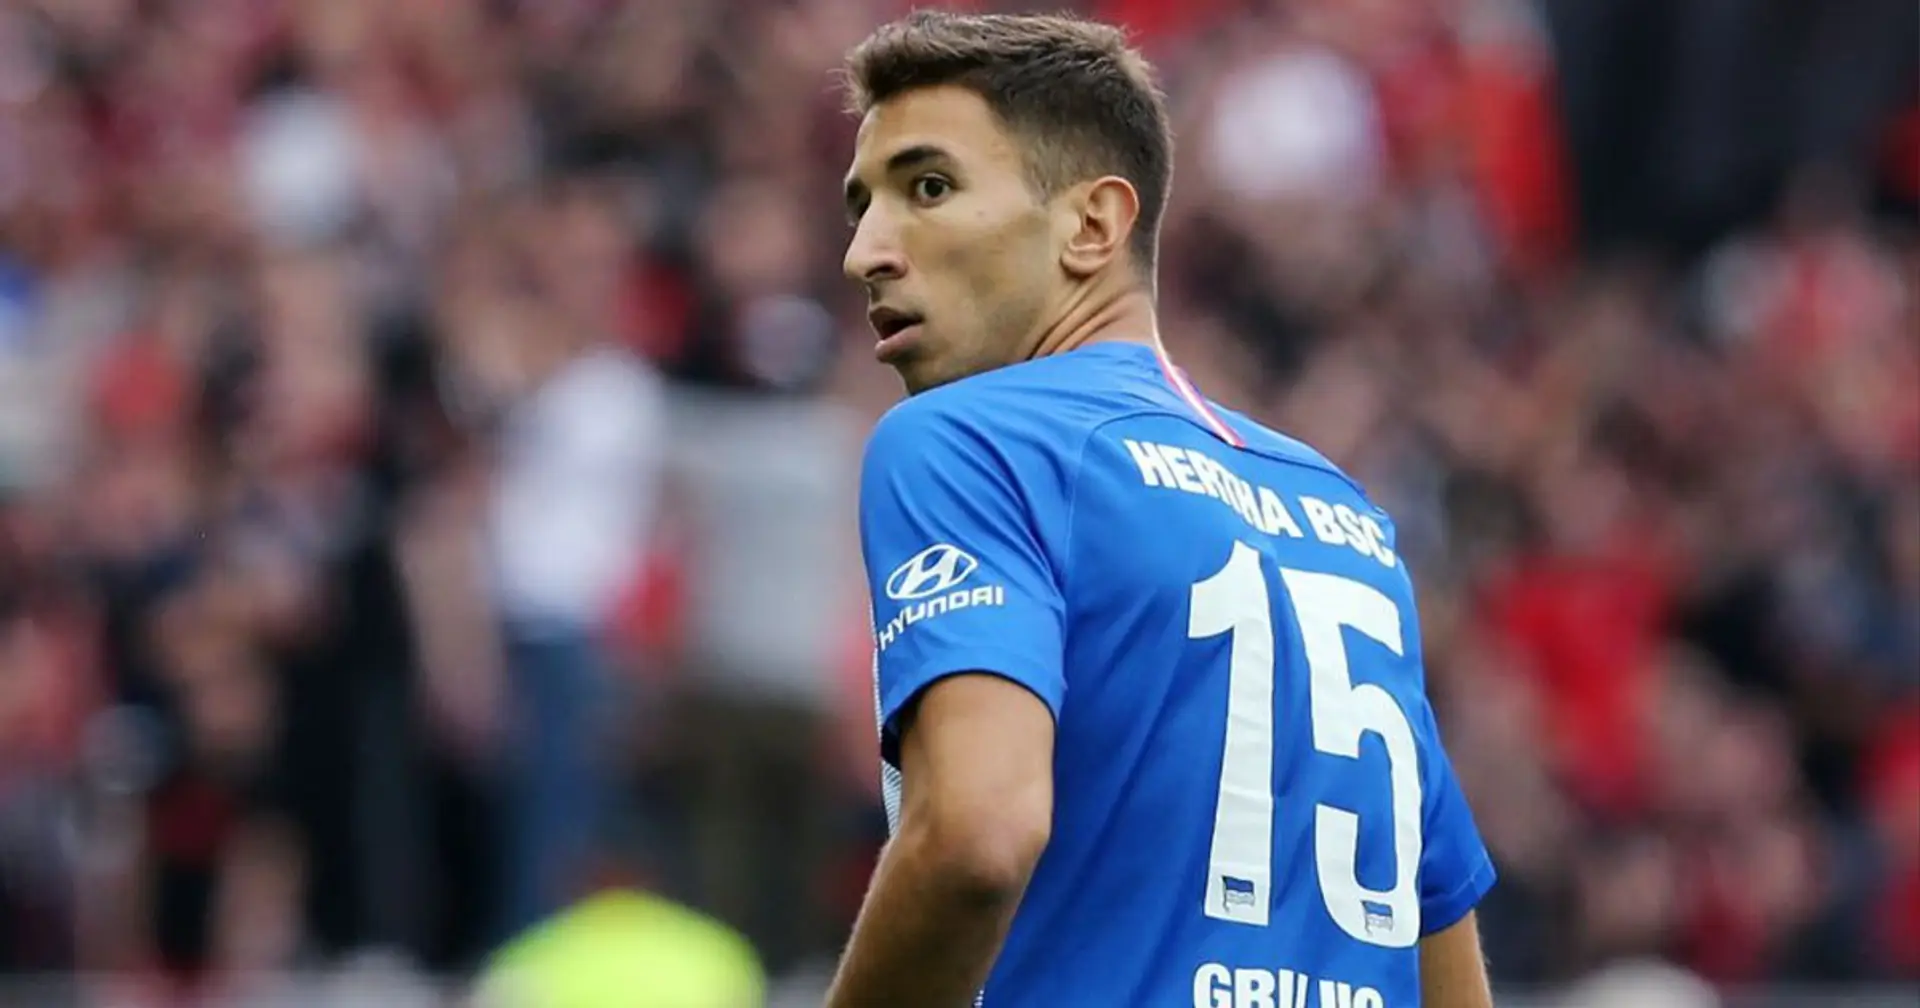 Marko Grujic dominates pitch after Bundesliga return but will it be enough to stay at Liverpool next season?